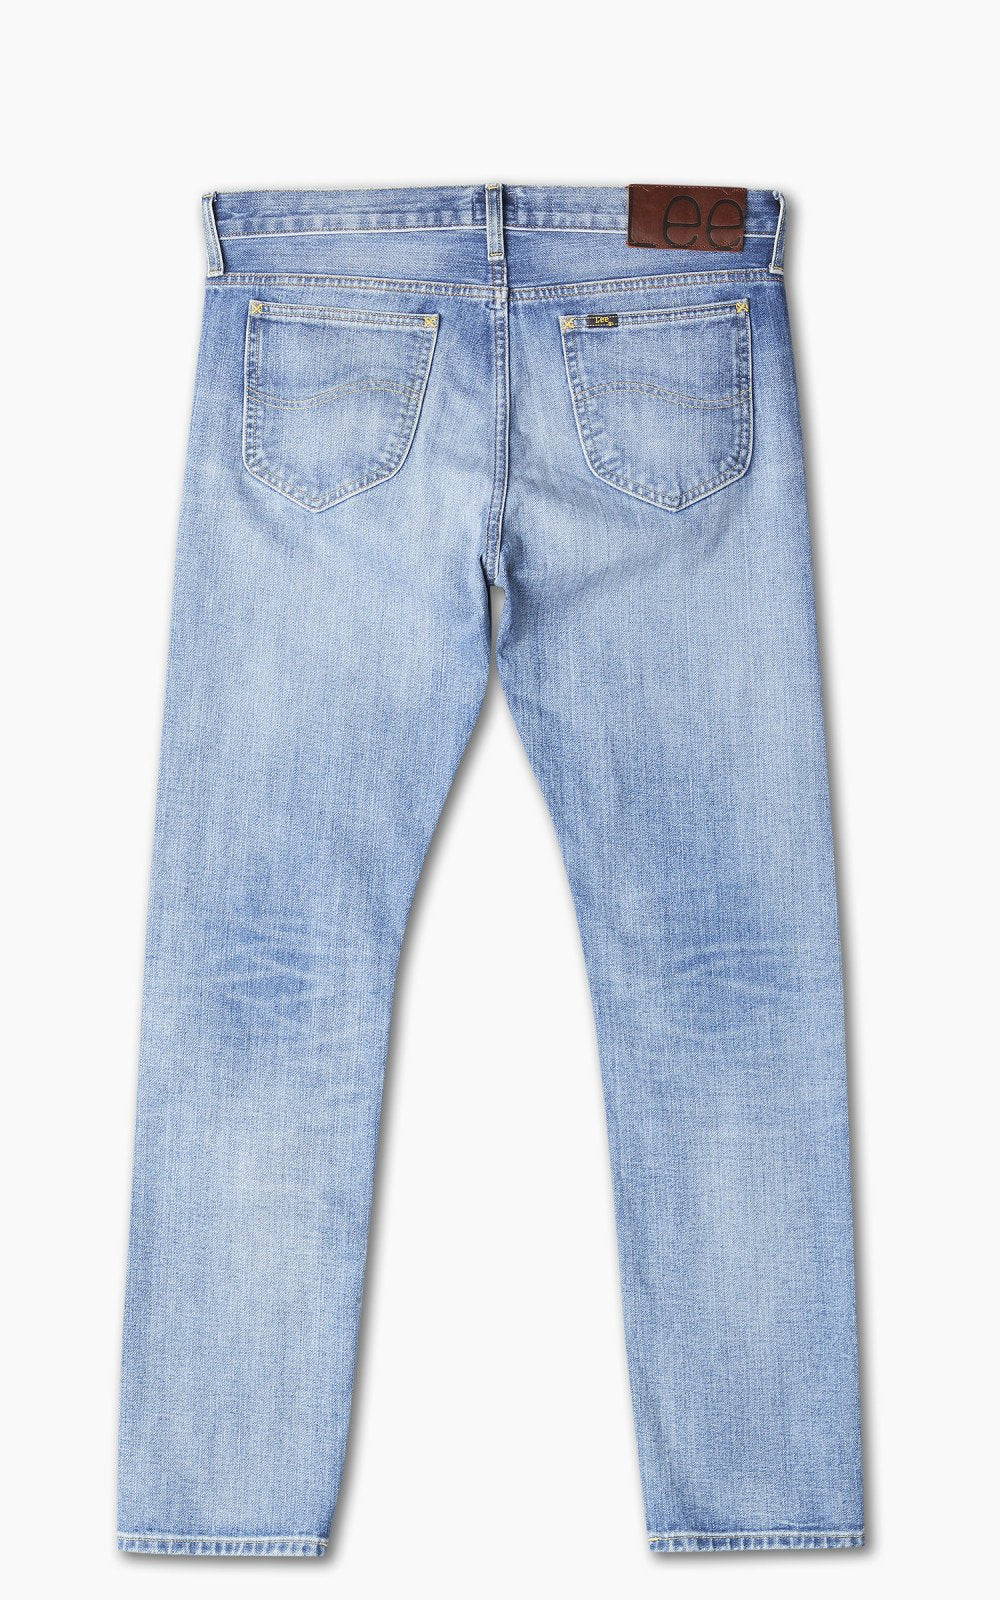 Lee 101 - Rider - 13.5oz Washed Left Hand Twill Selvedge